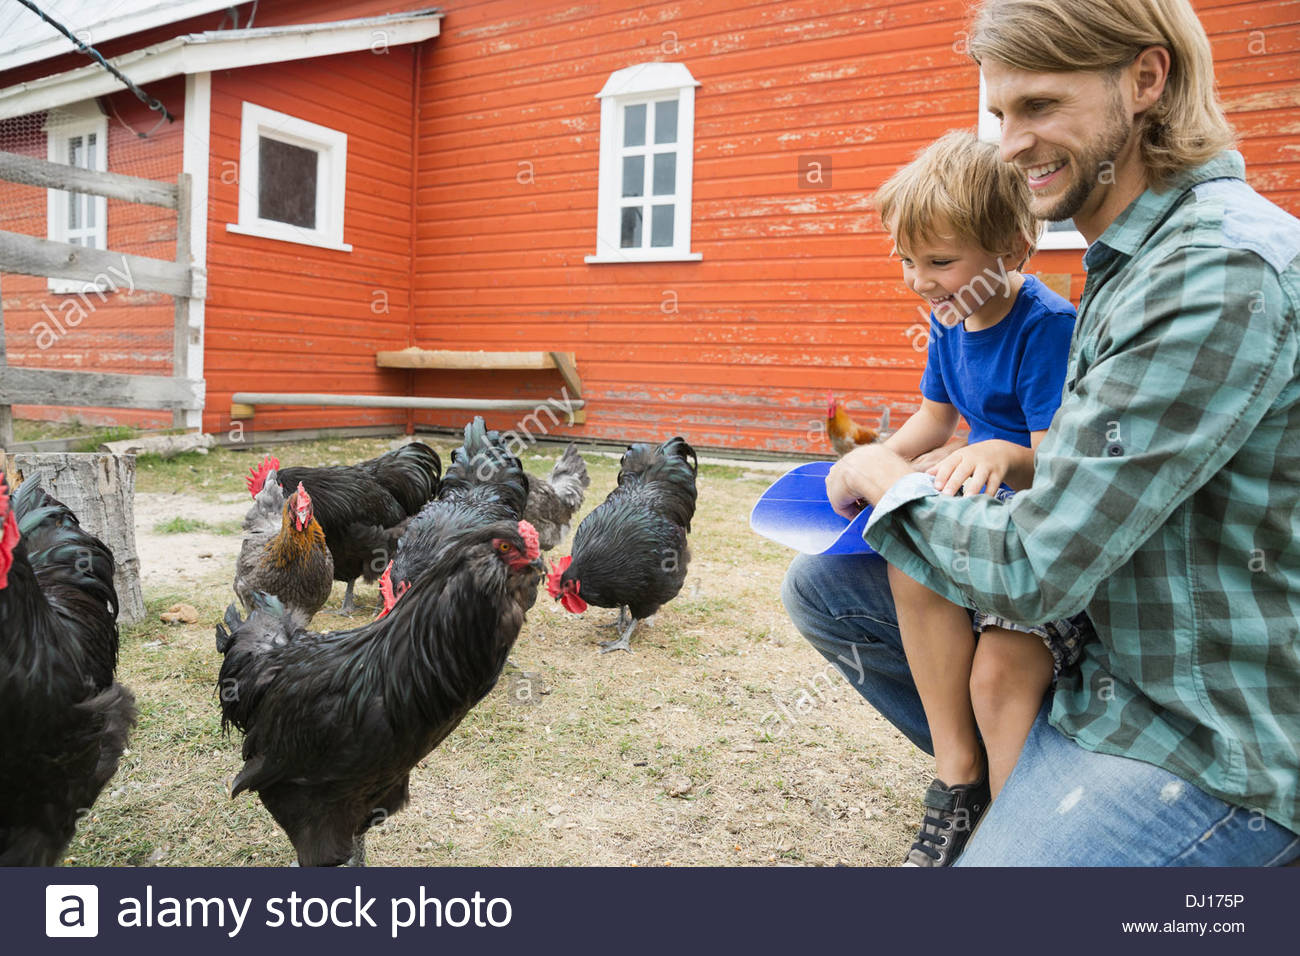 Father and son feeding chickens on farm Stock Photo